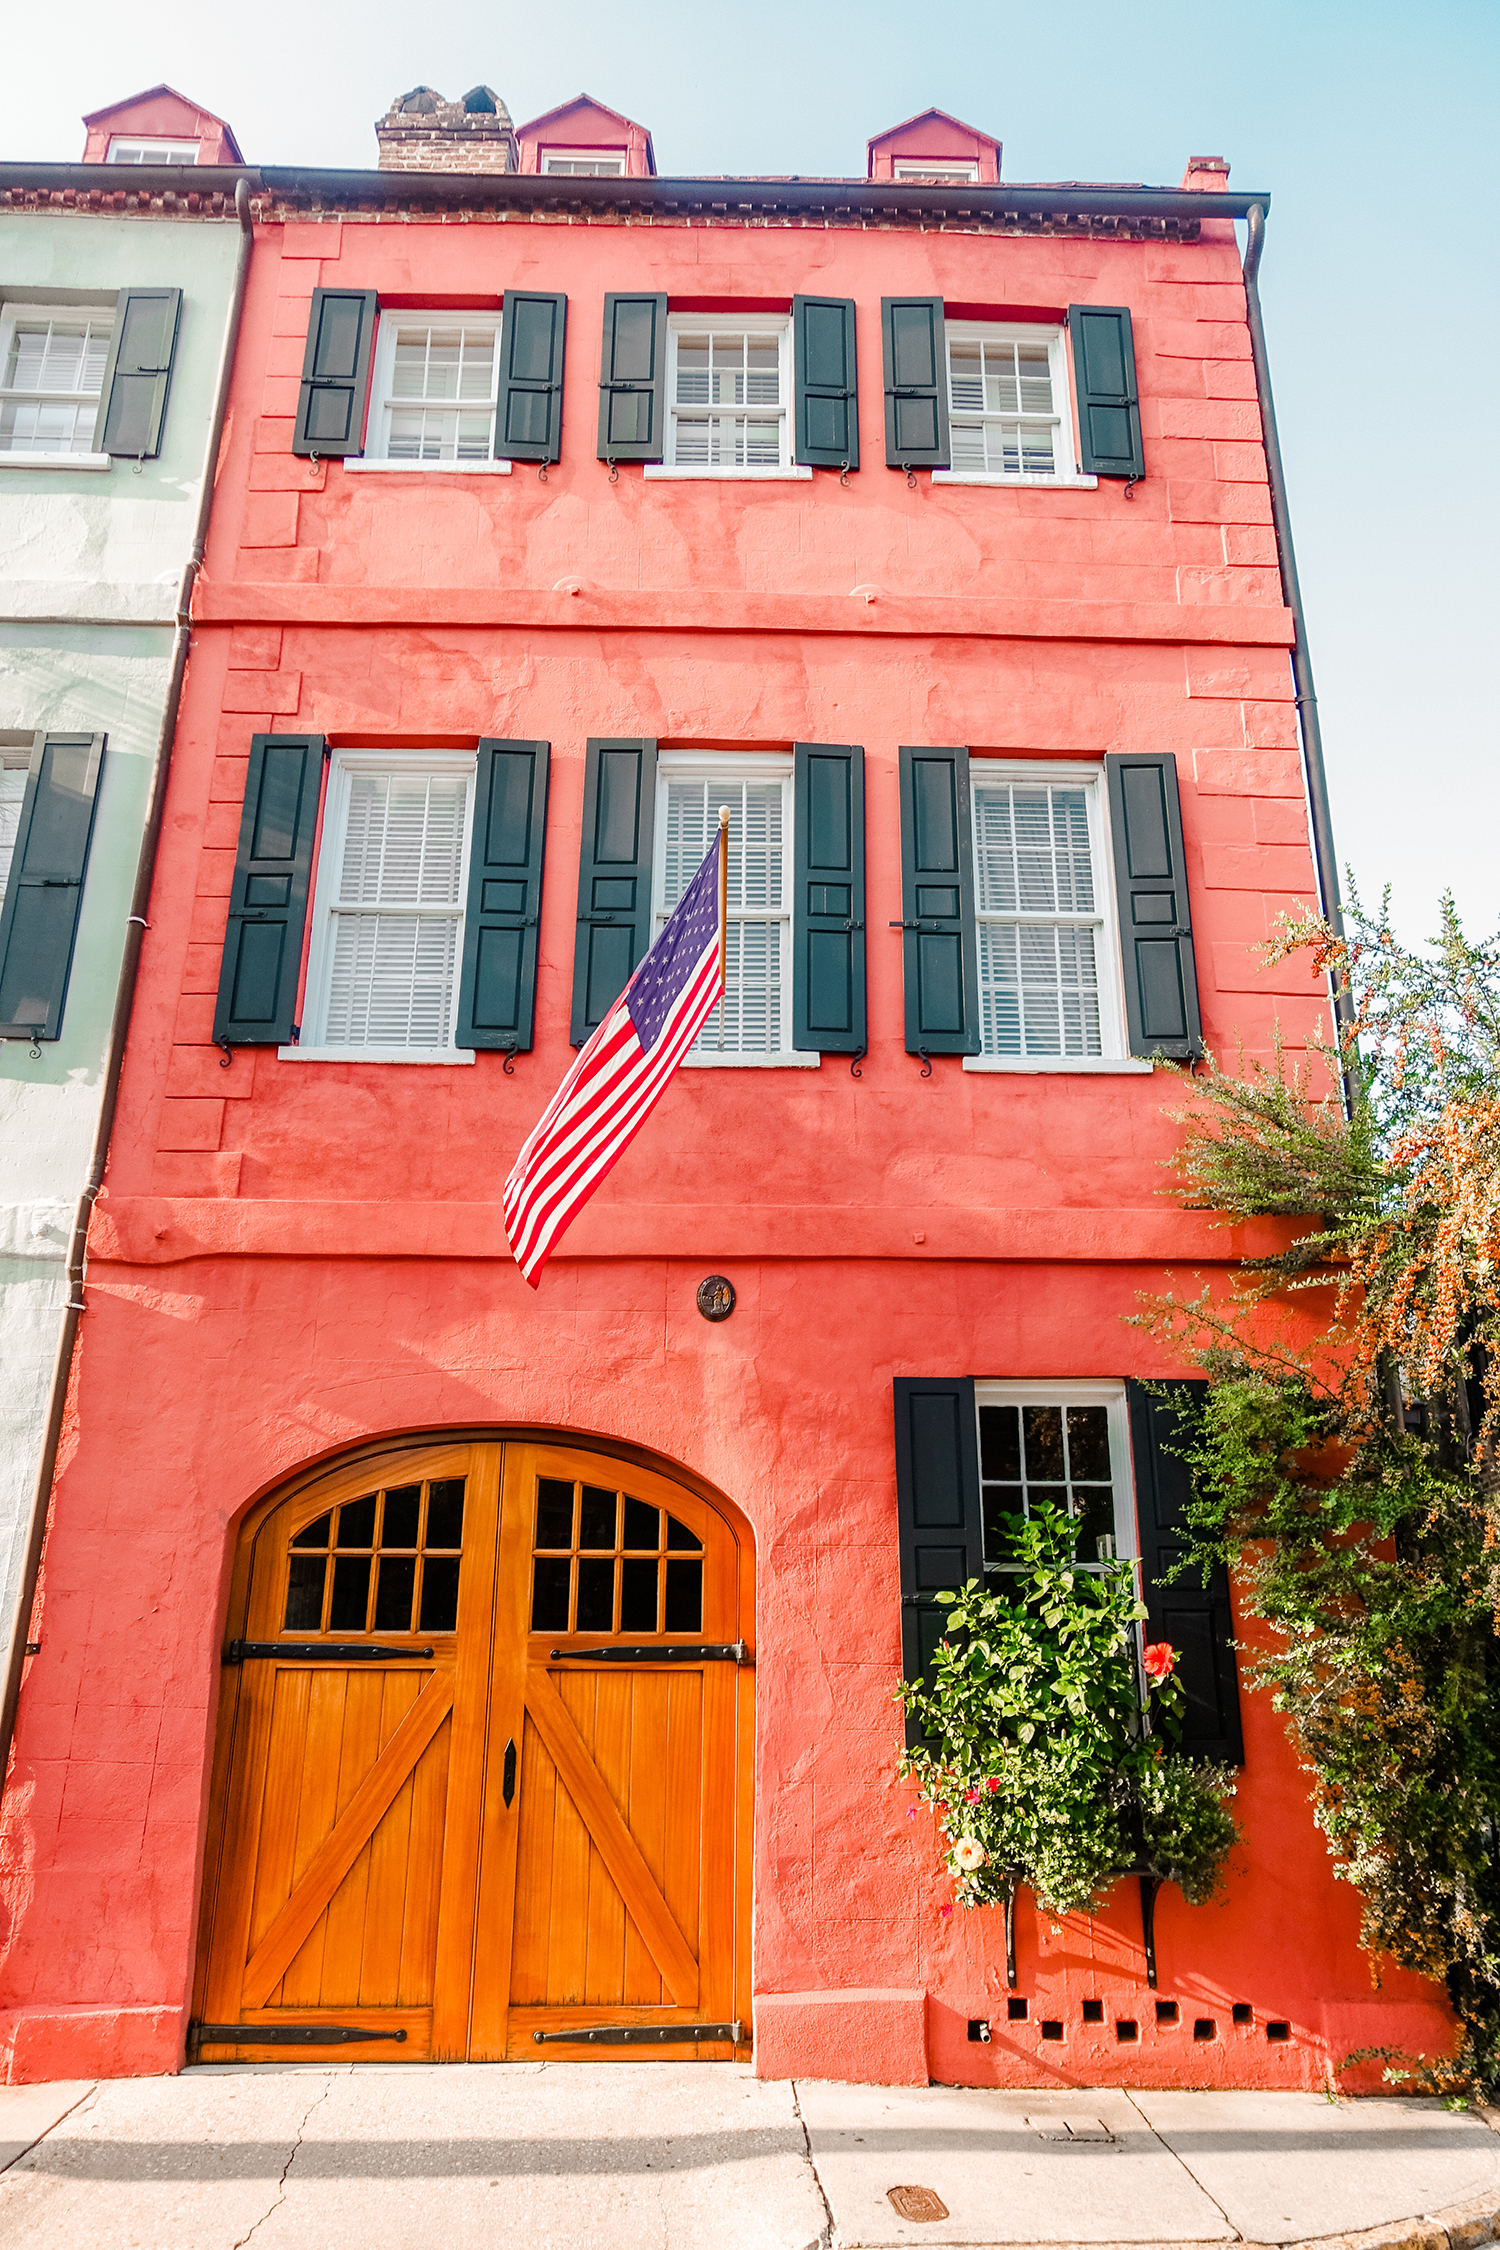 Alyssa Campanella of The A List blog's 48 Hours in Charleston itinerary